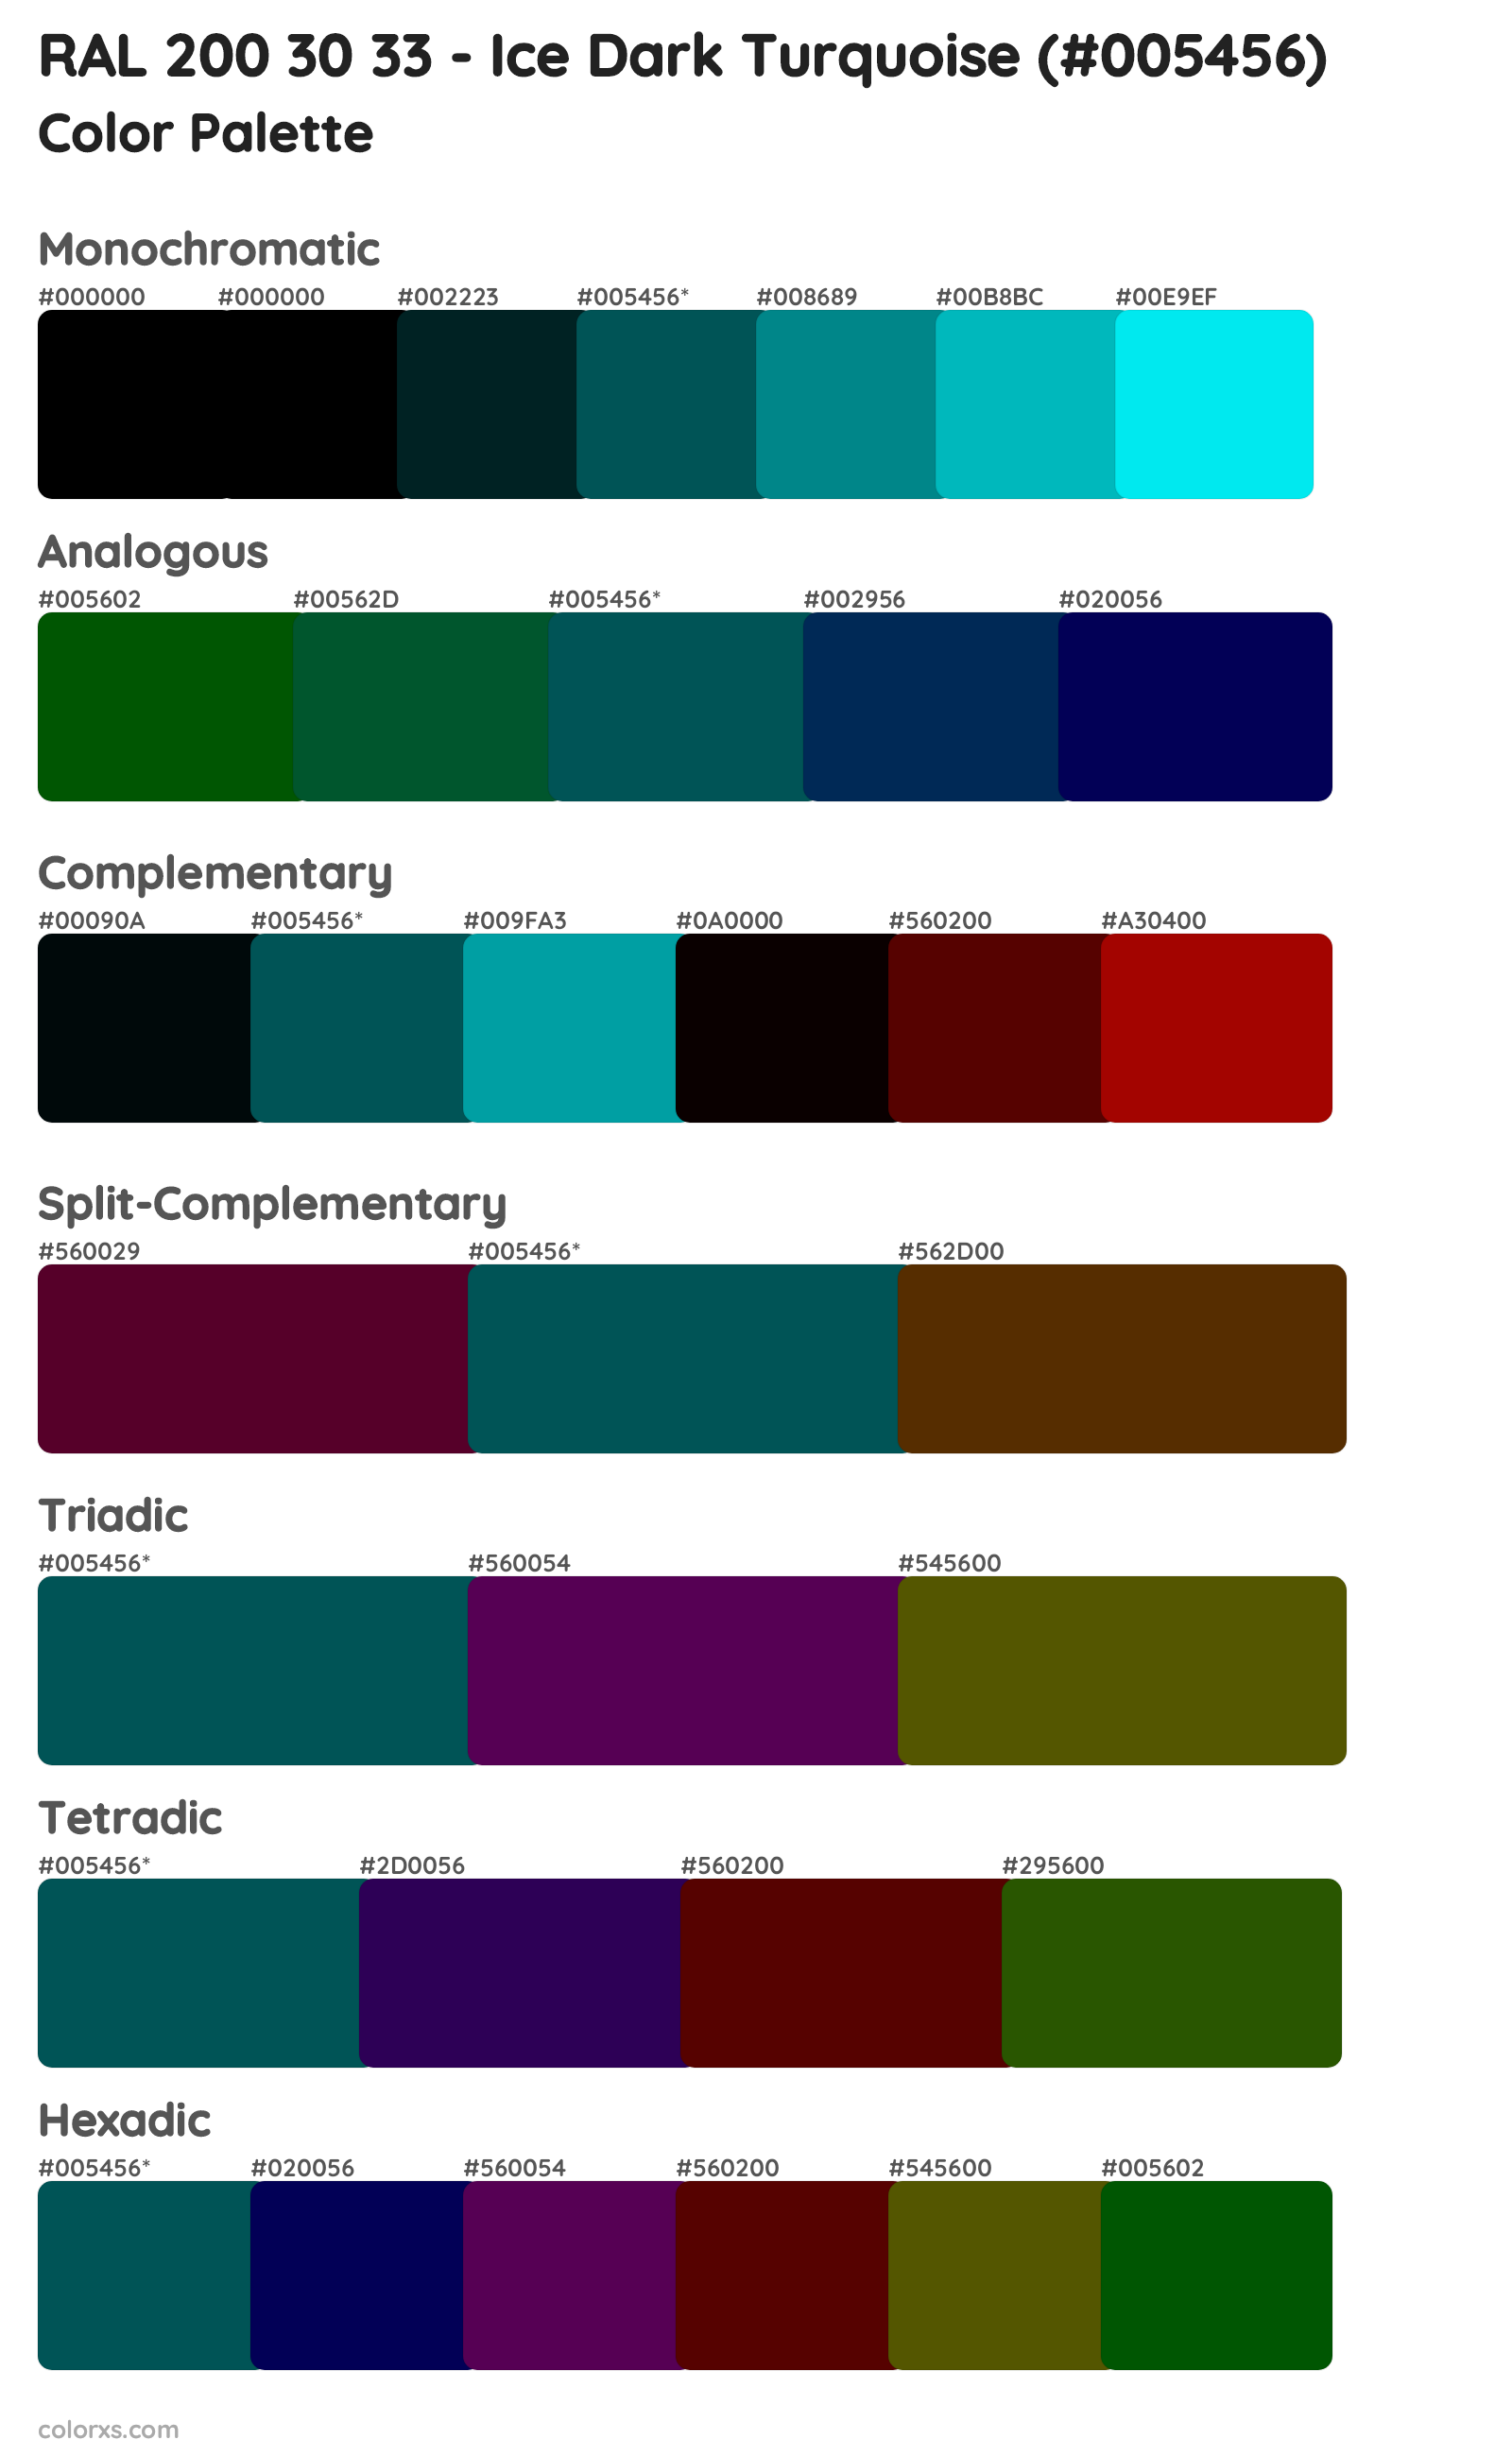 RAL 200 30 33 - Ice Dark Turquoise Color Scheme Palettes